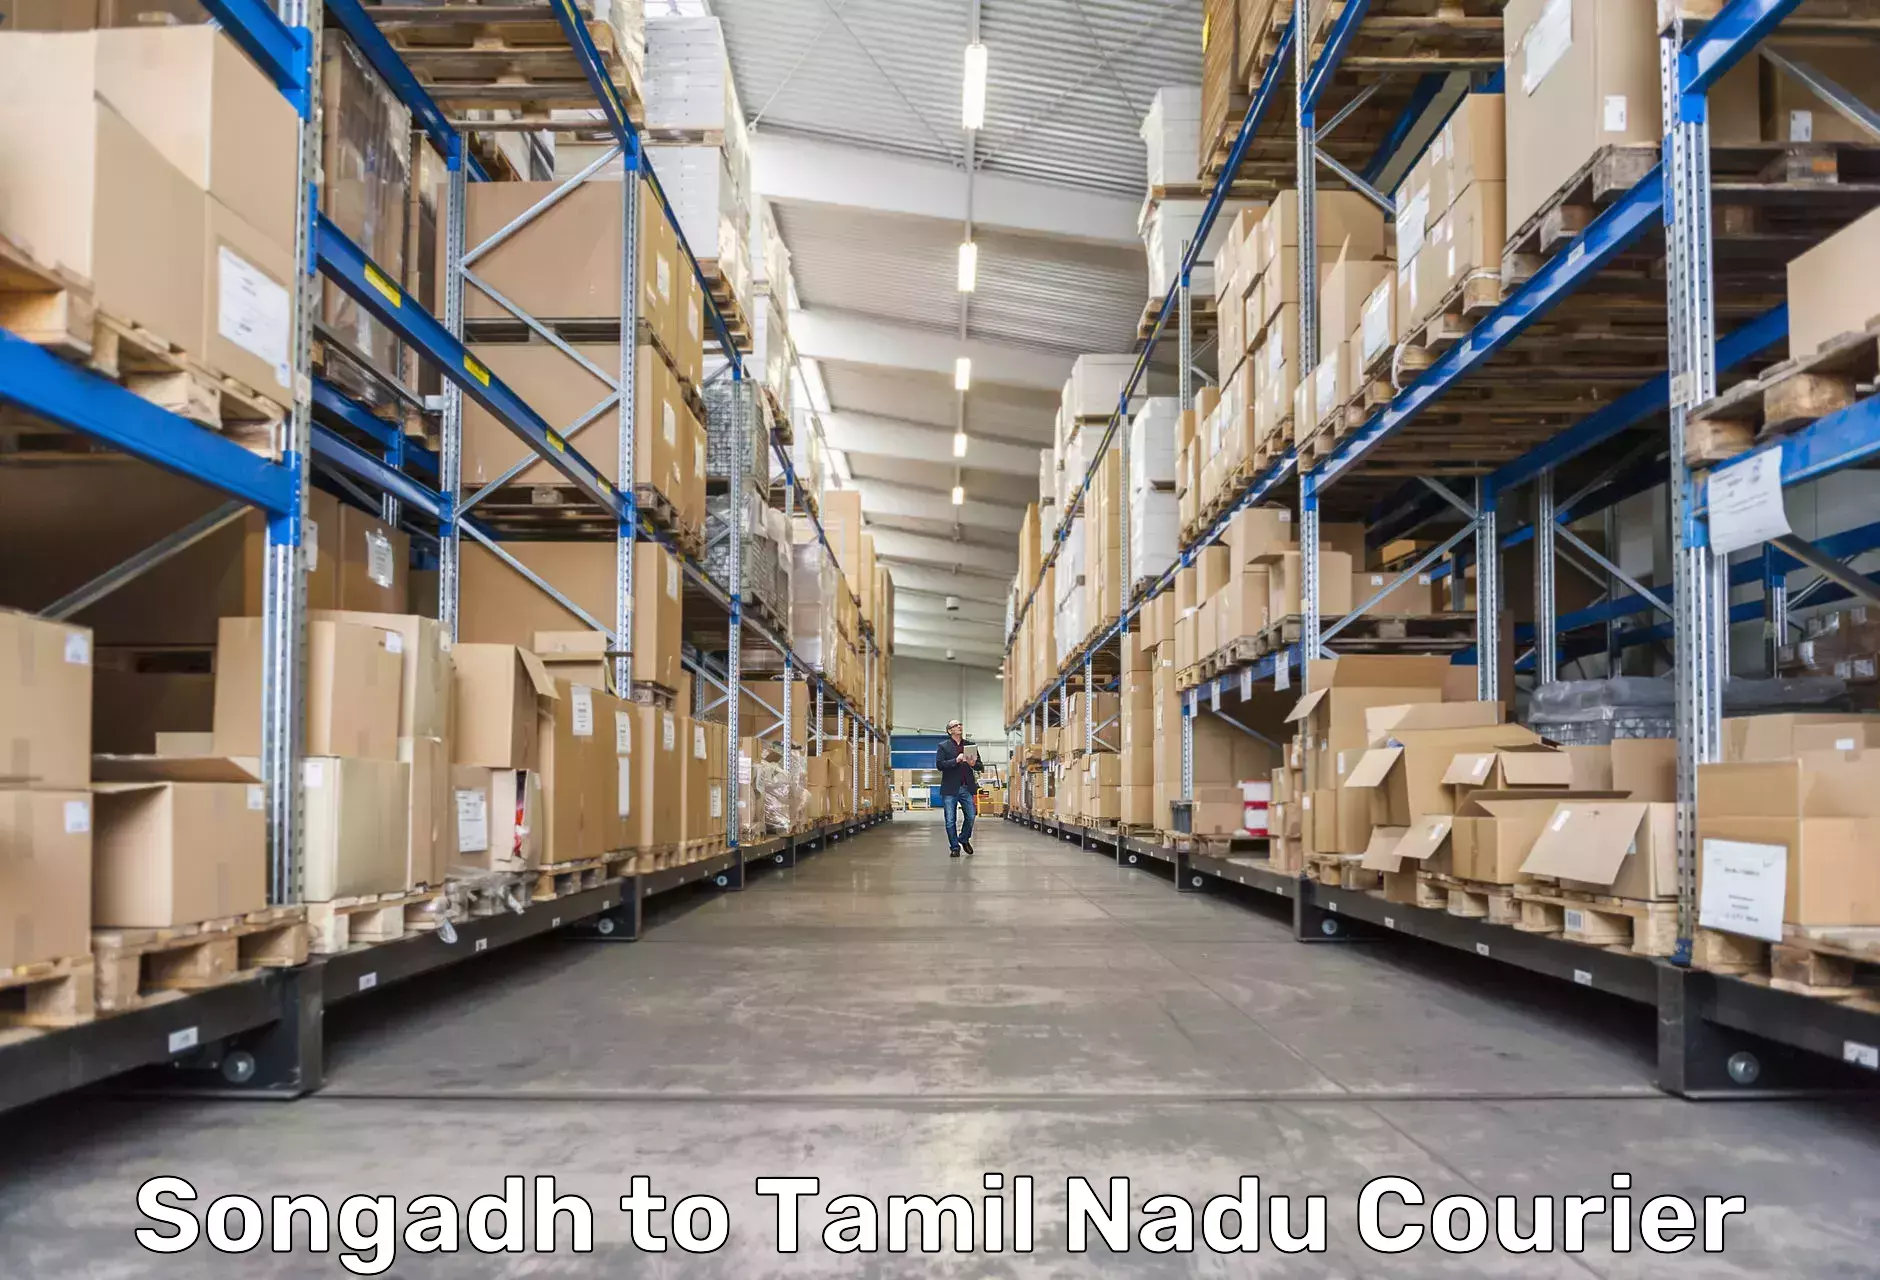 24/7 shipping services Songadh to Cuddalore